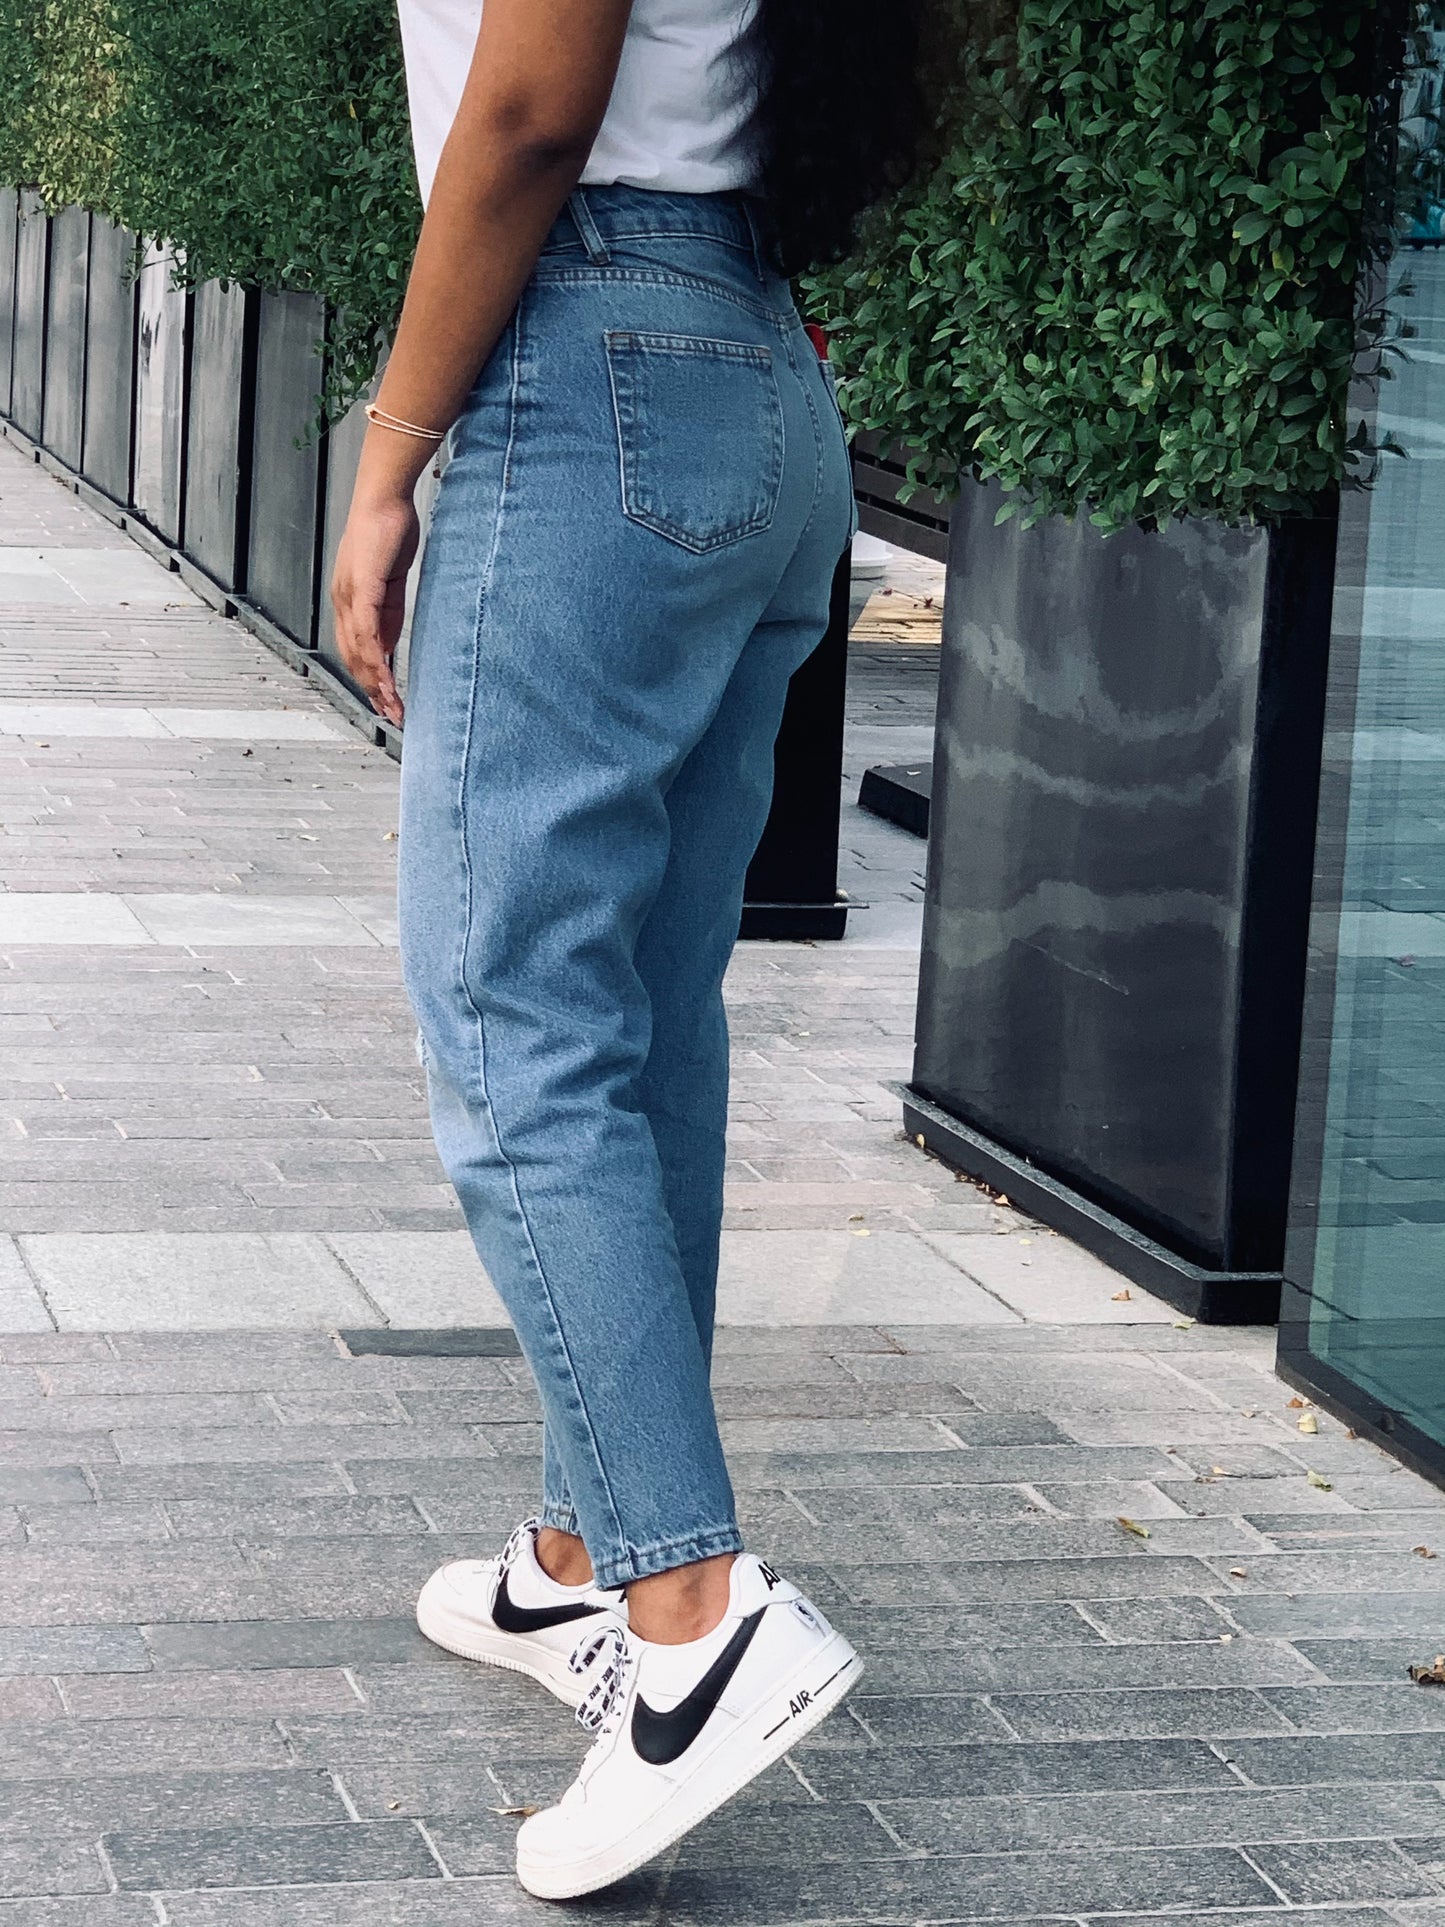 High-rise Mom Jeans